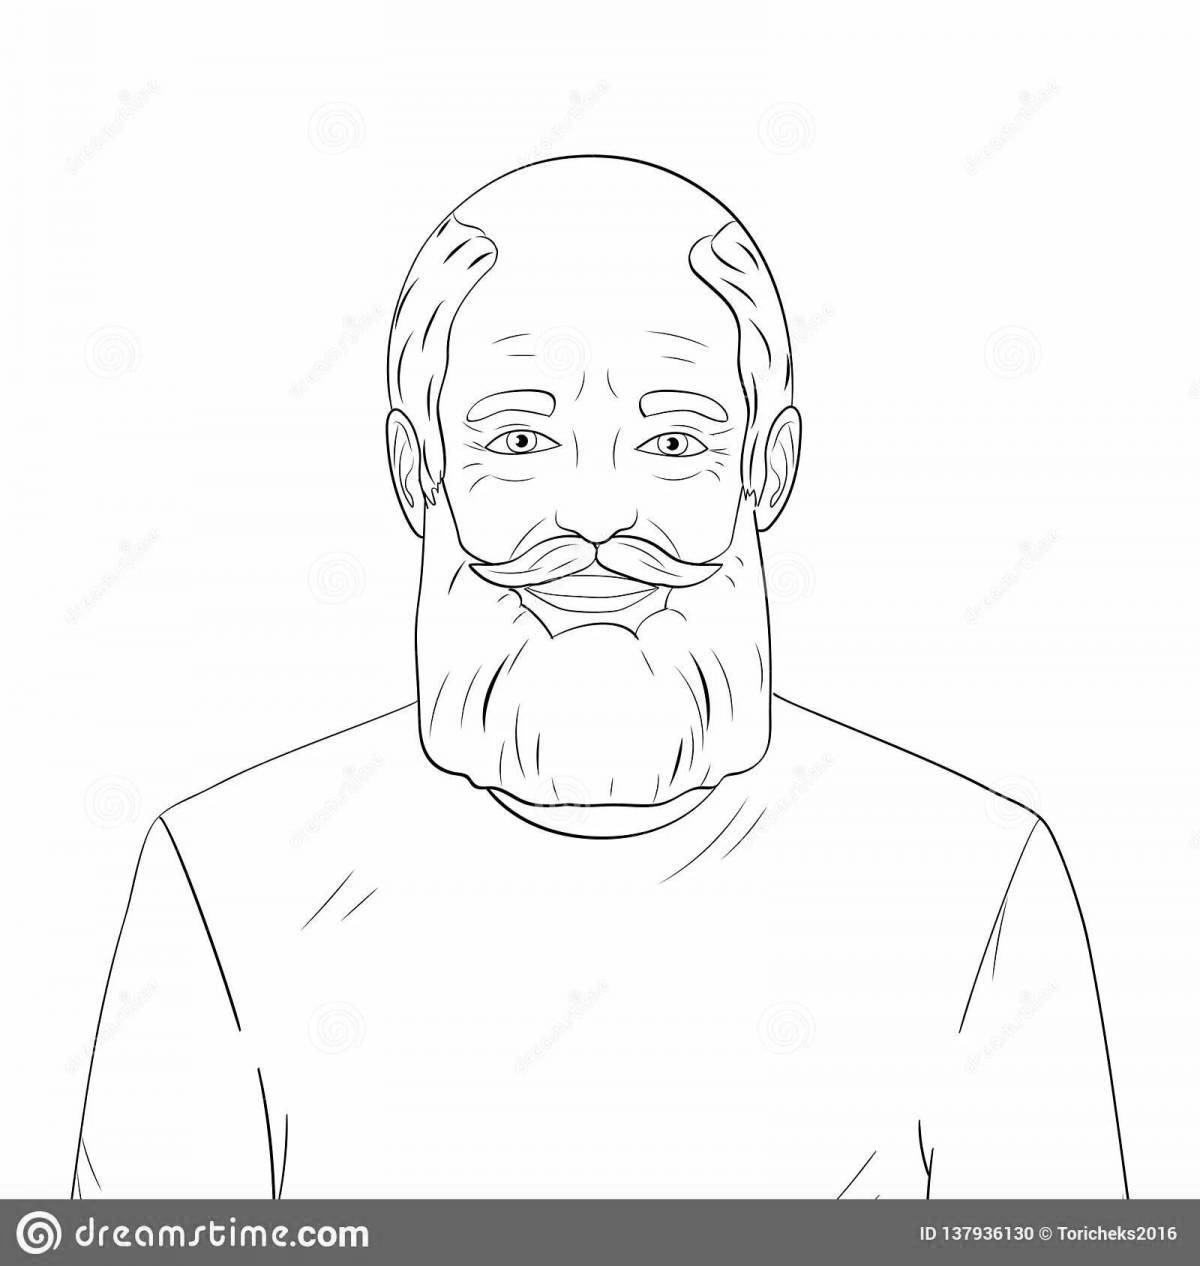 Colorful grandfather coloring for kids